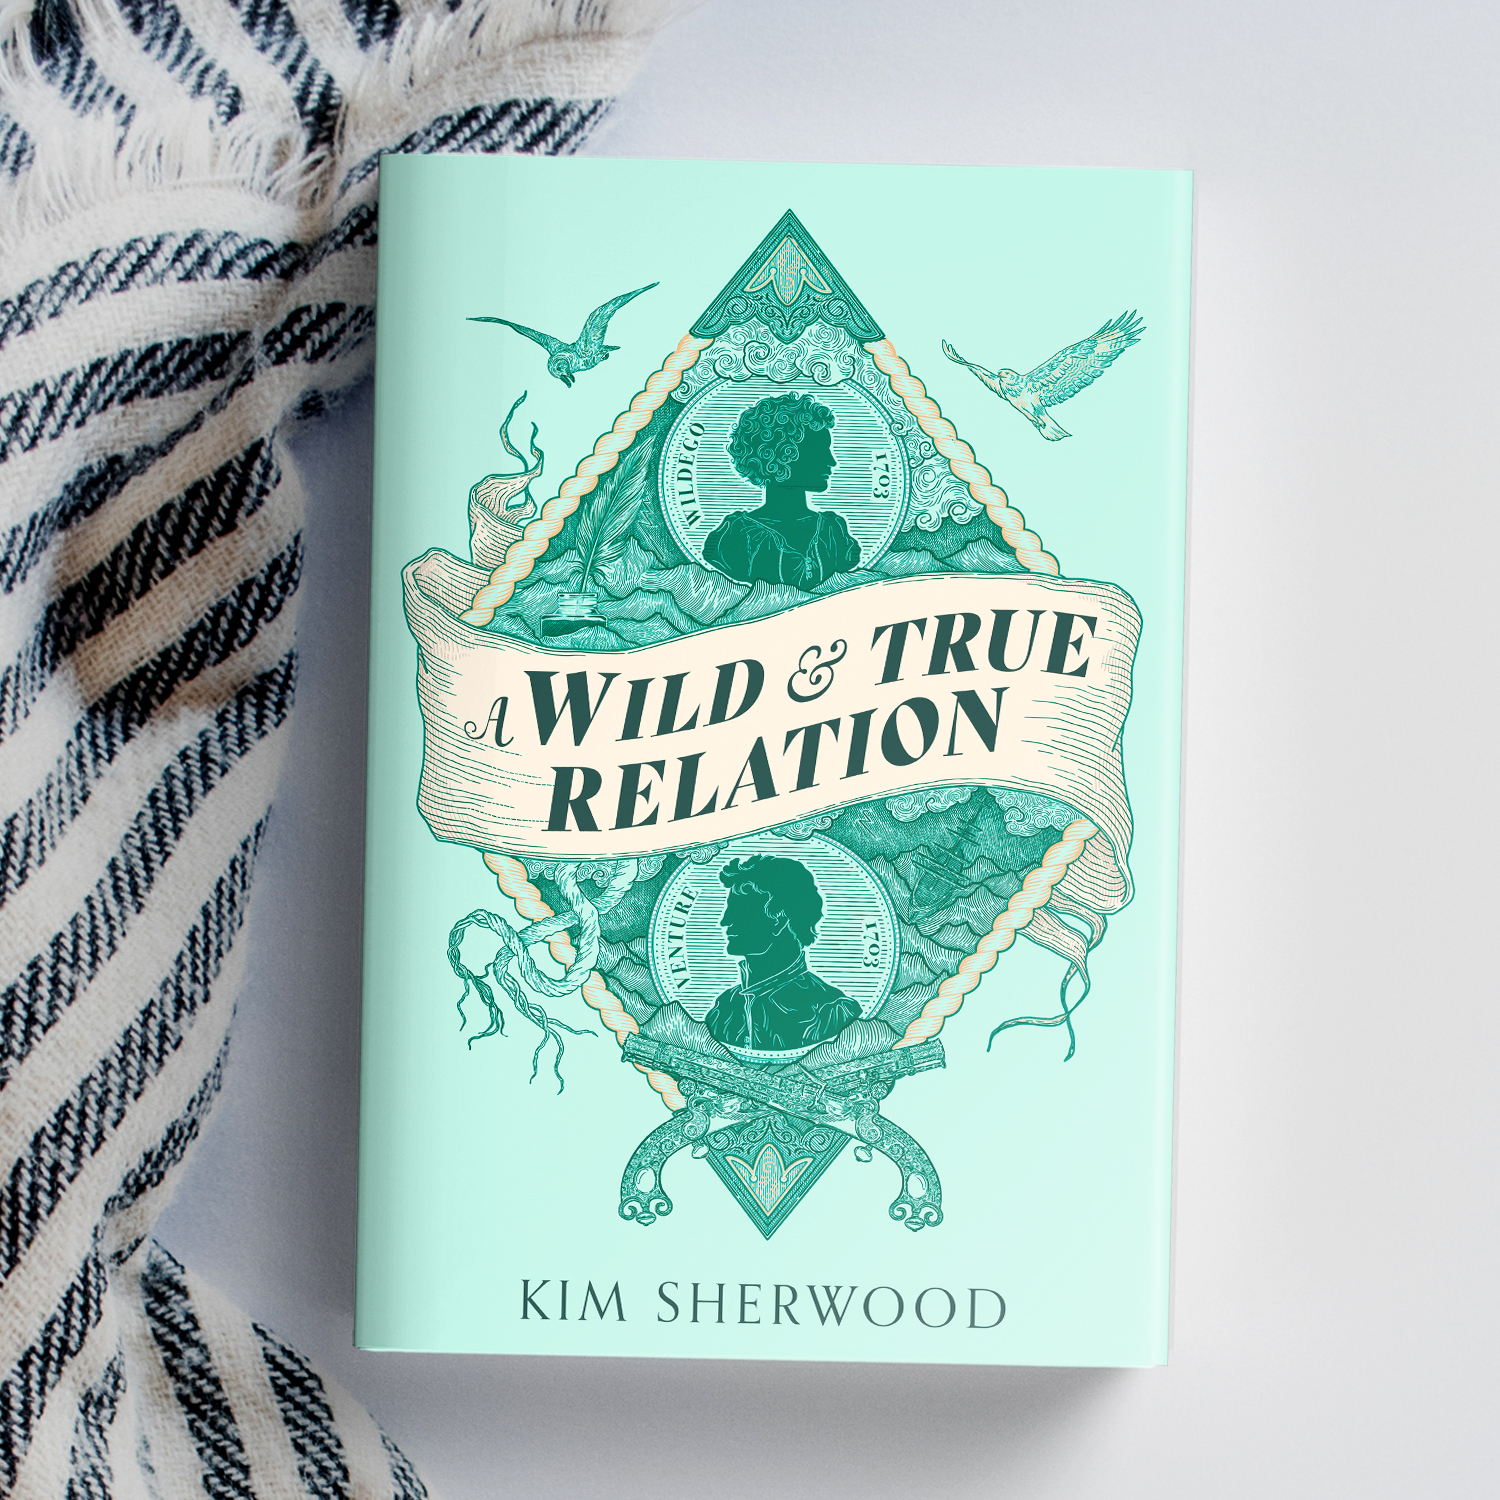 A Wild and True Relations by Kim Sherwood